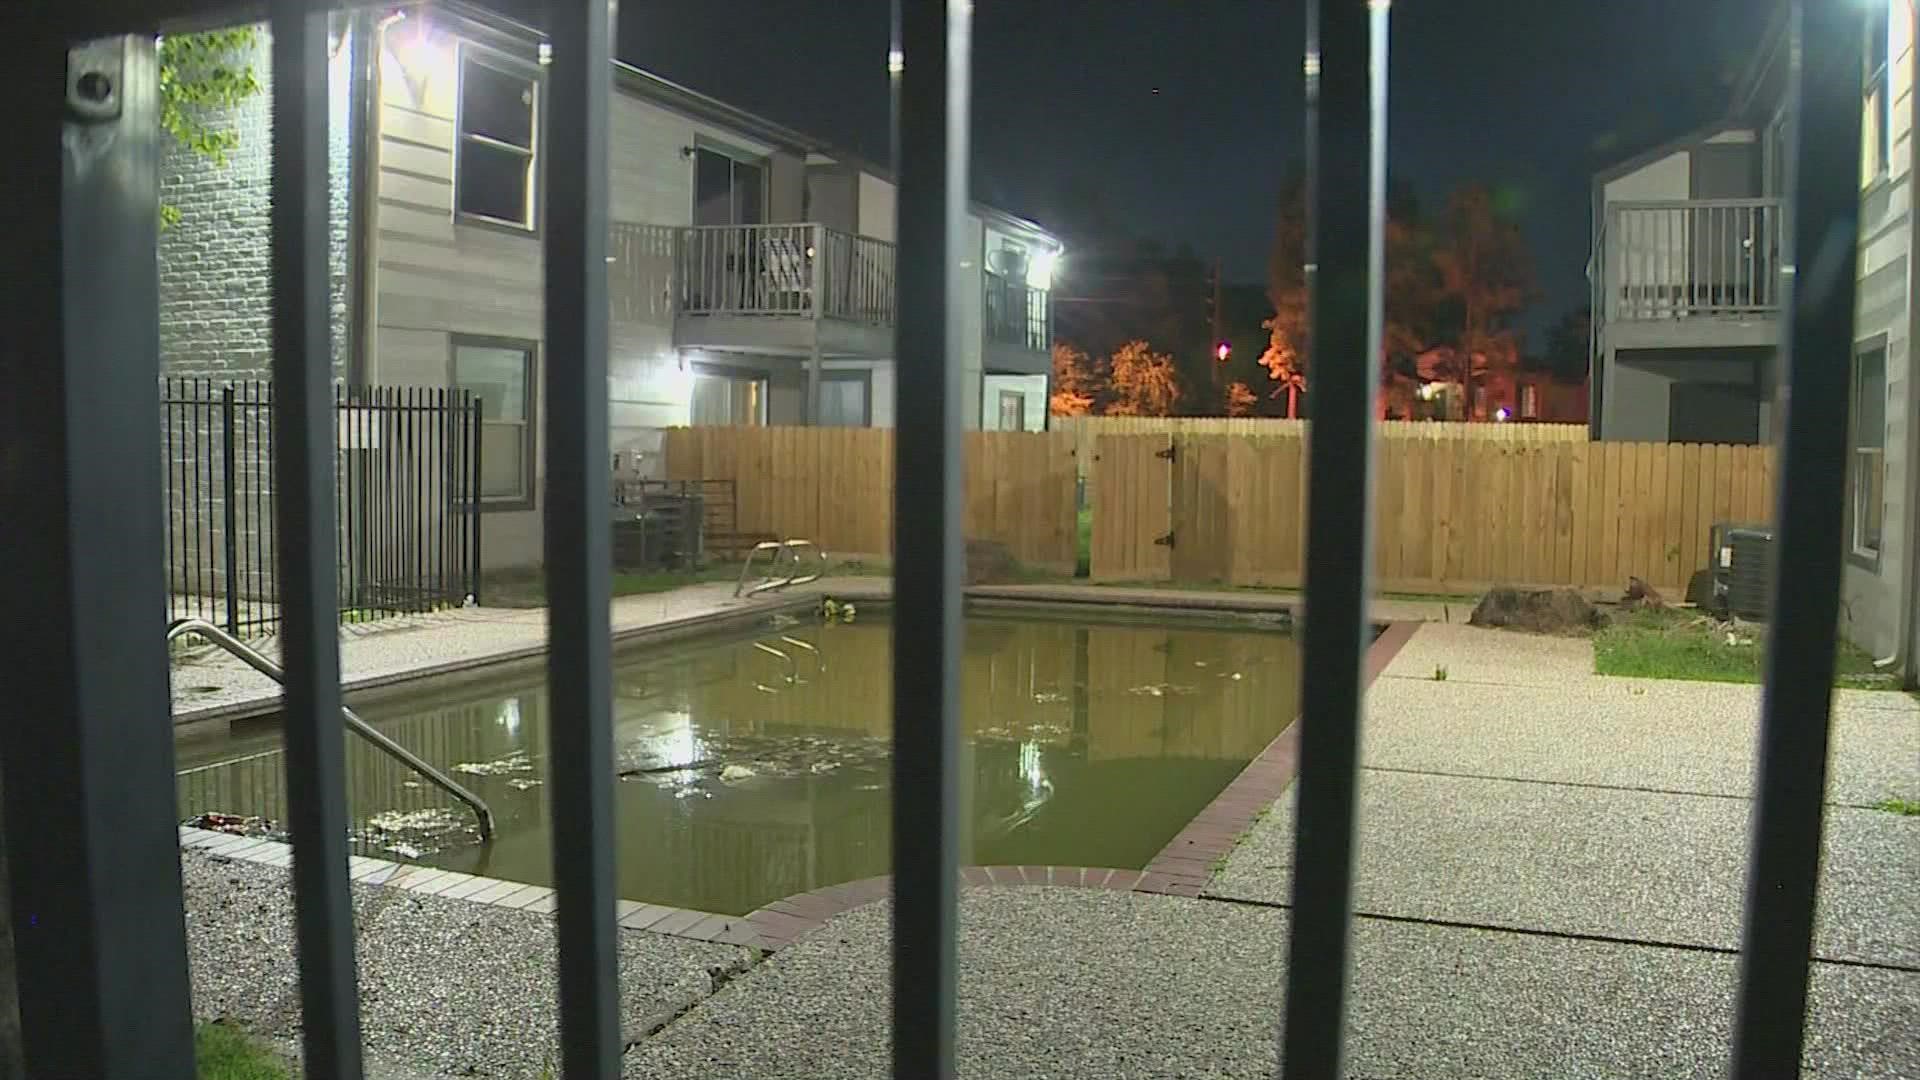 The 3-year-old boy was found unresponsive in a pool and was pronounced dead at a nearby hospital, according to Harris County Sheriff Ed Gonzalez.